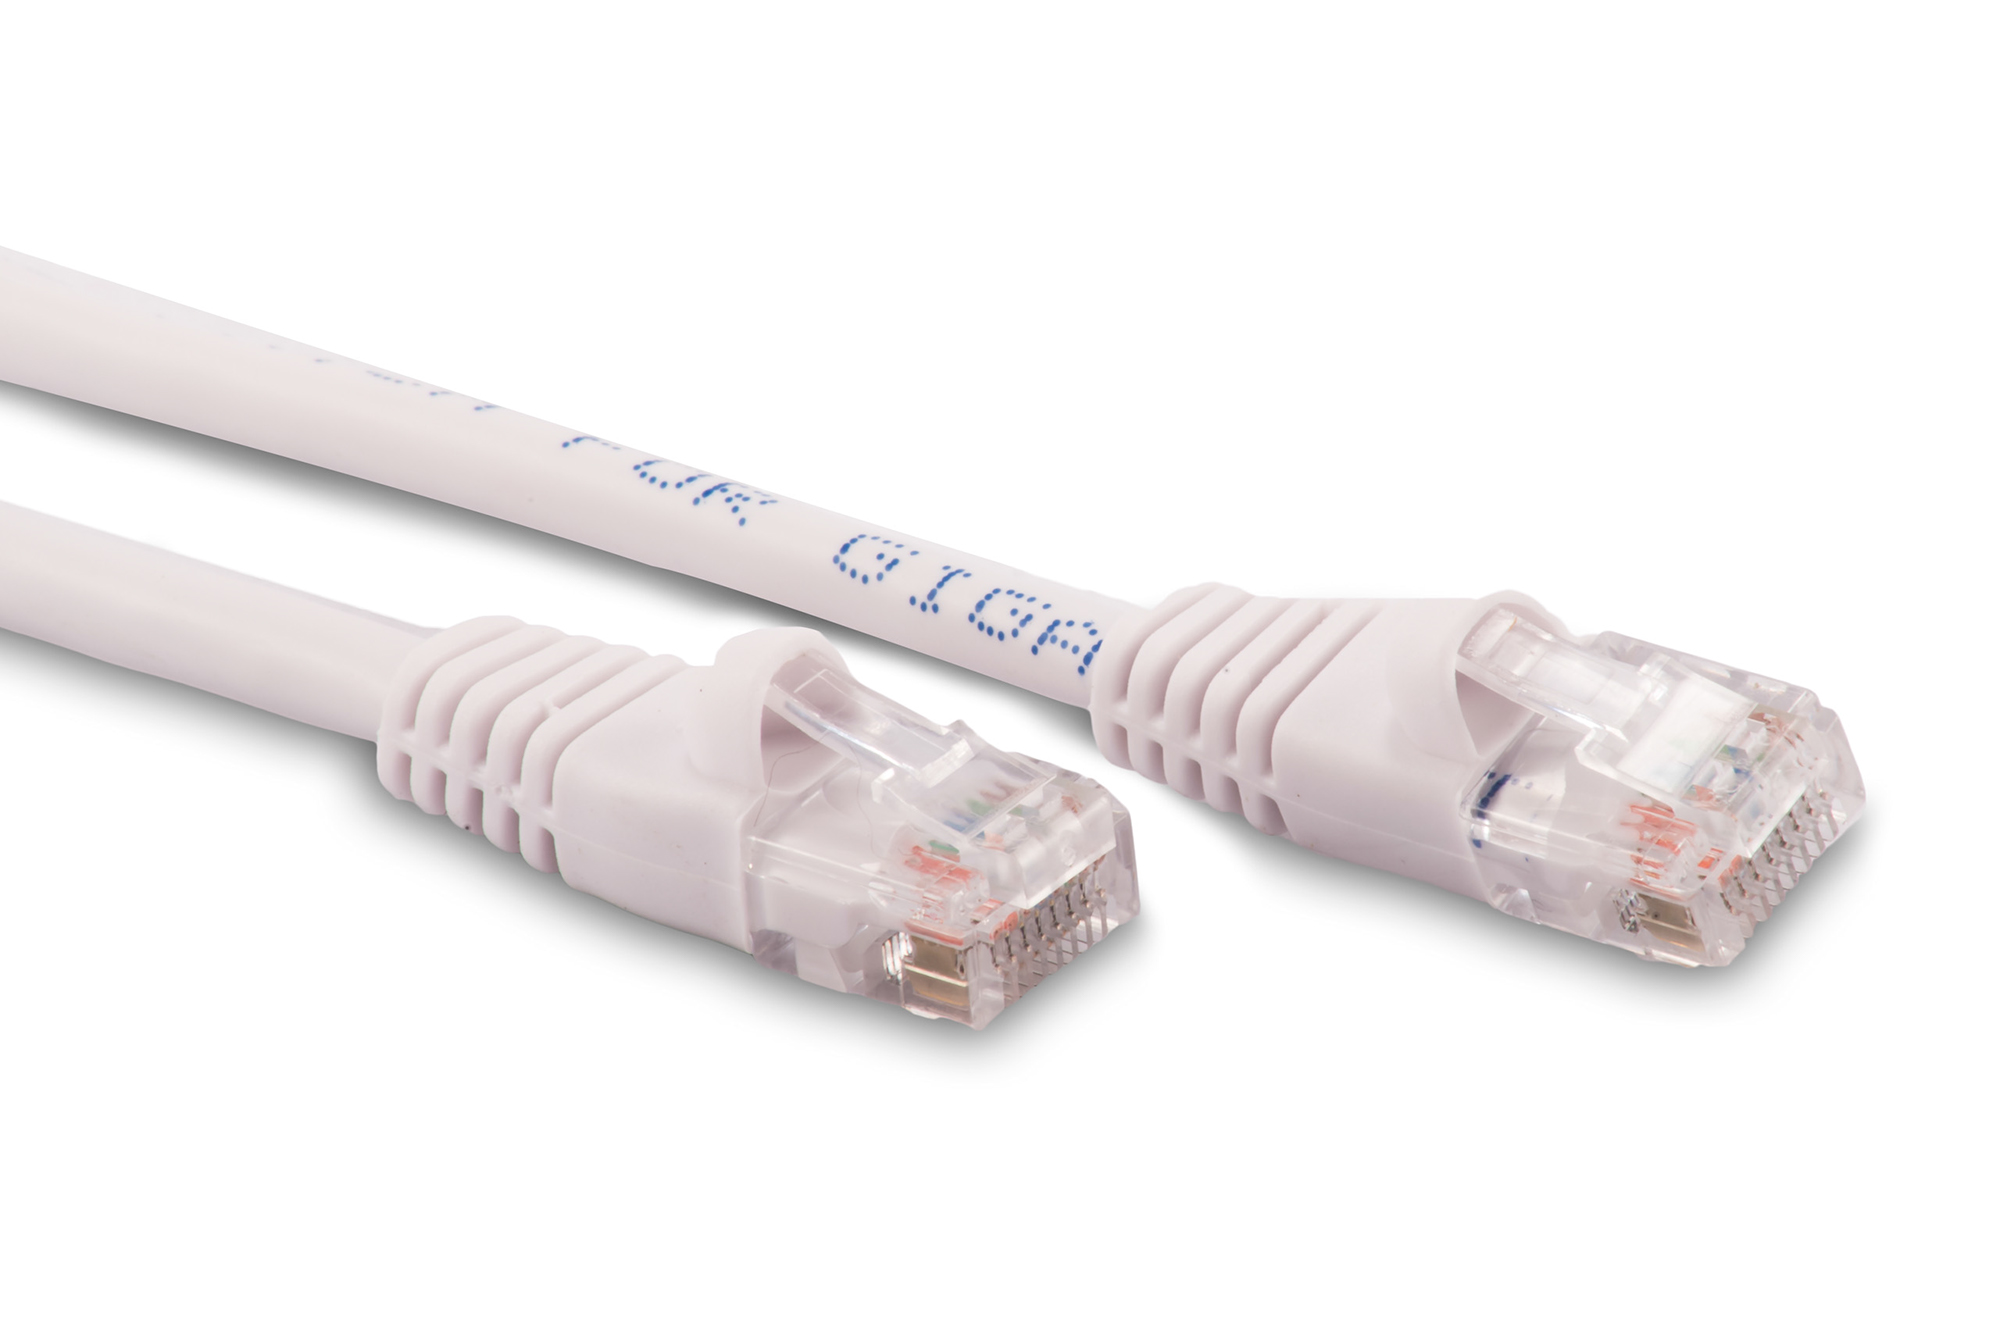 25ft Cat6 Ethernet Patch Cable - White Color - Snagless Boot, Stranded, RJ45, 550Mhz, 24AWG